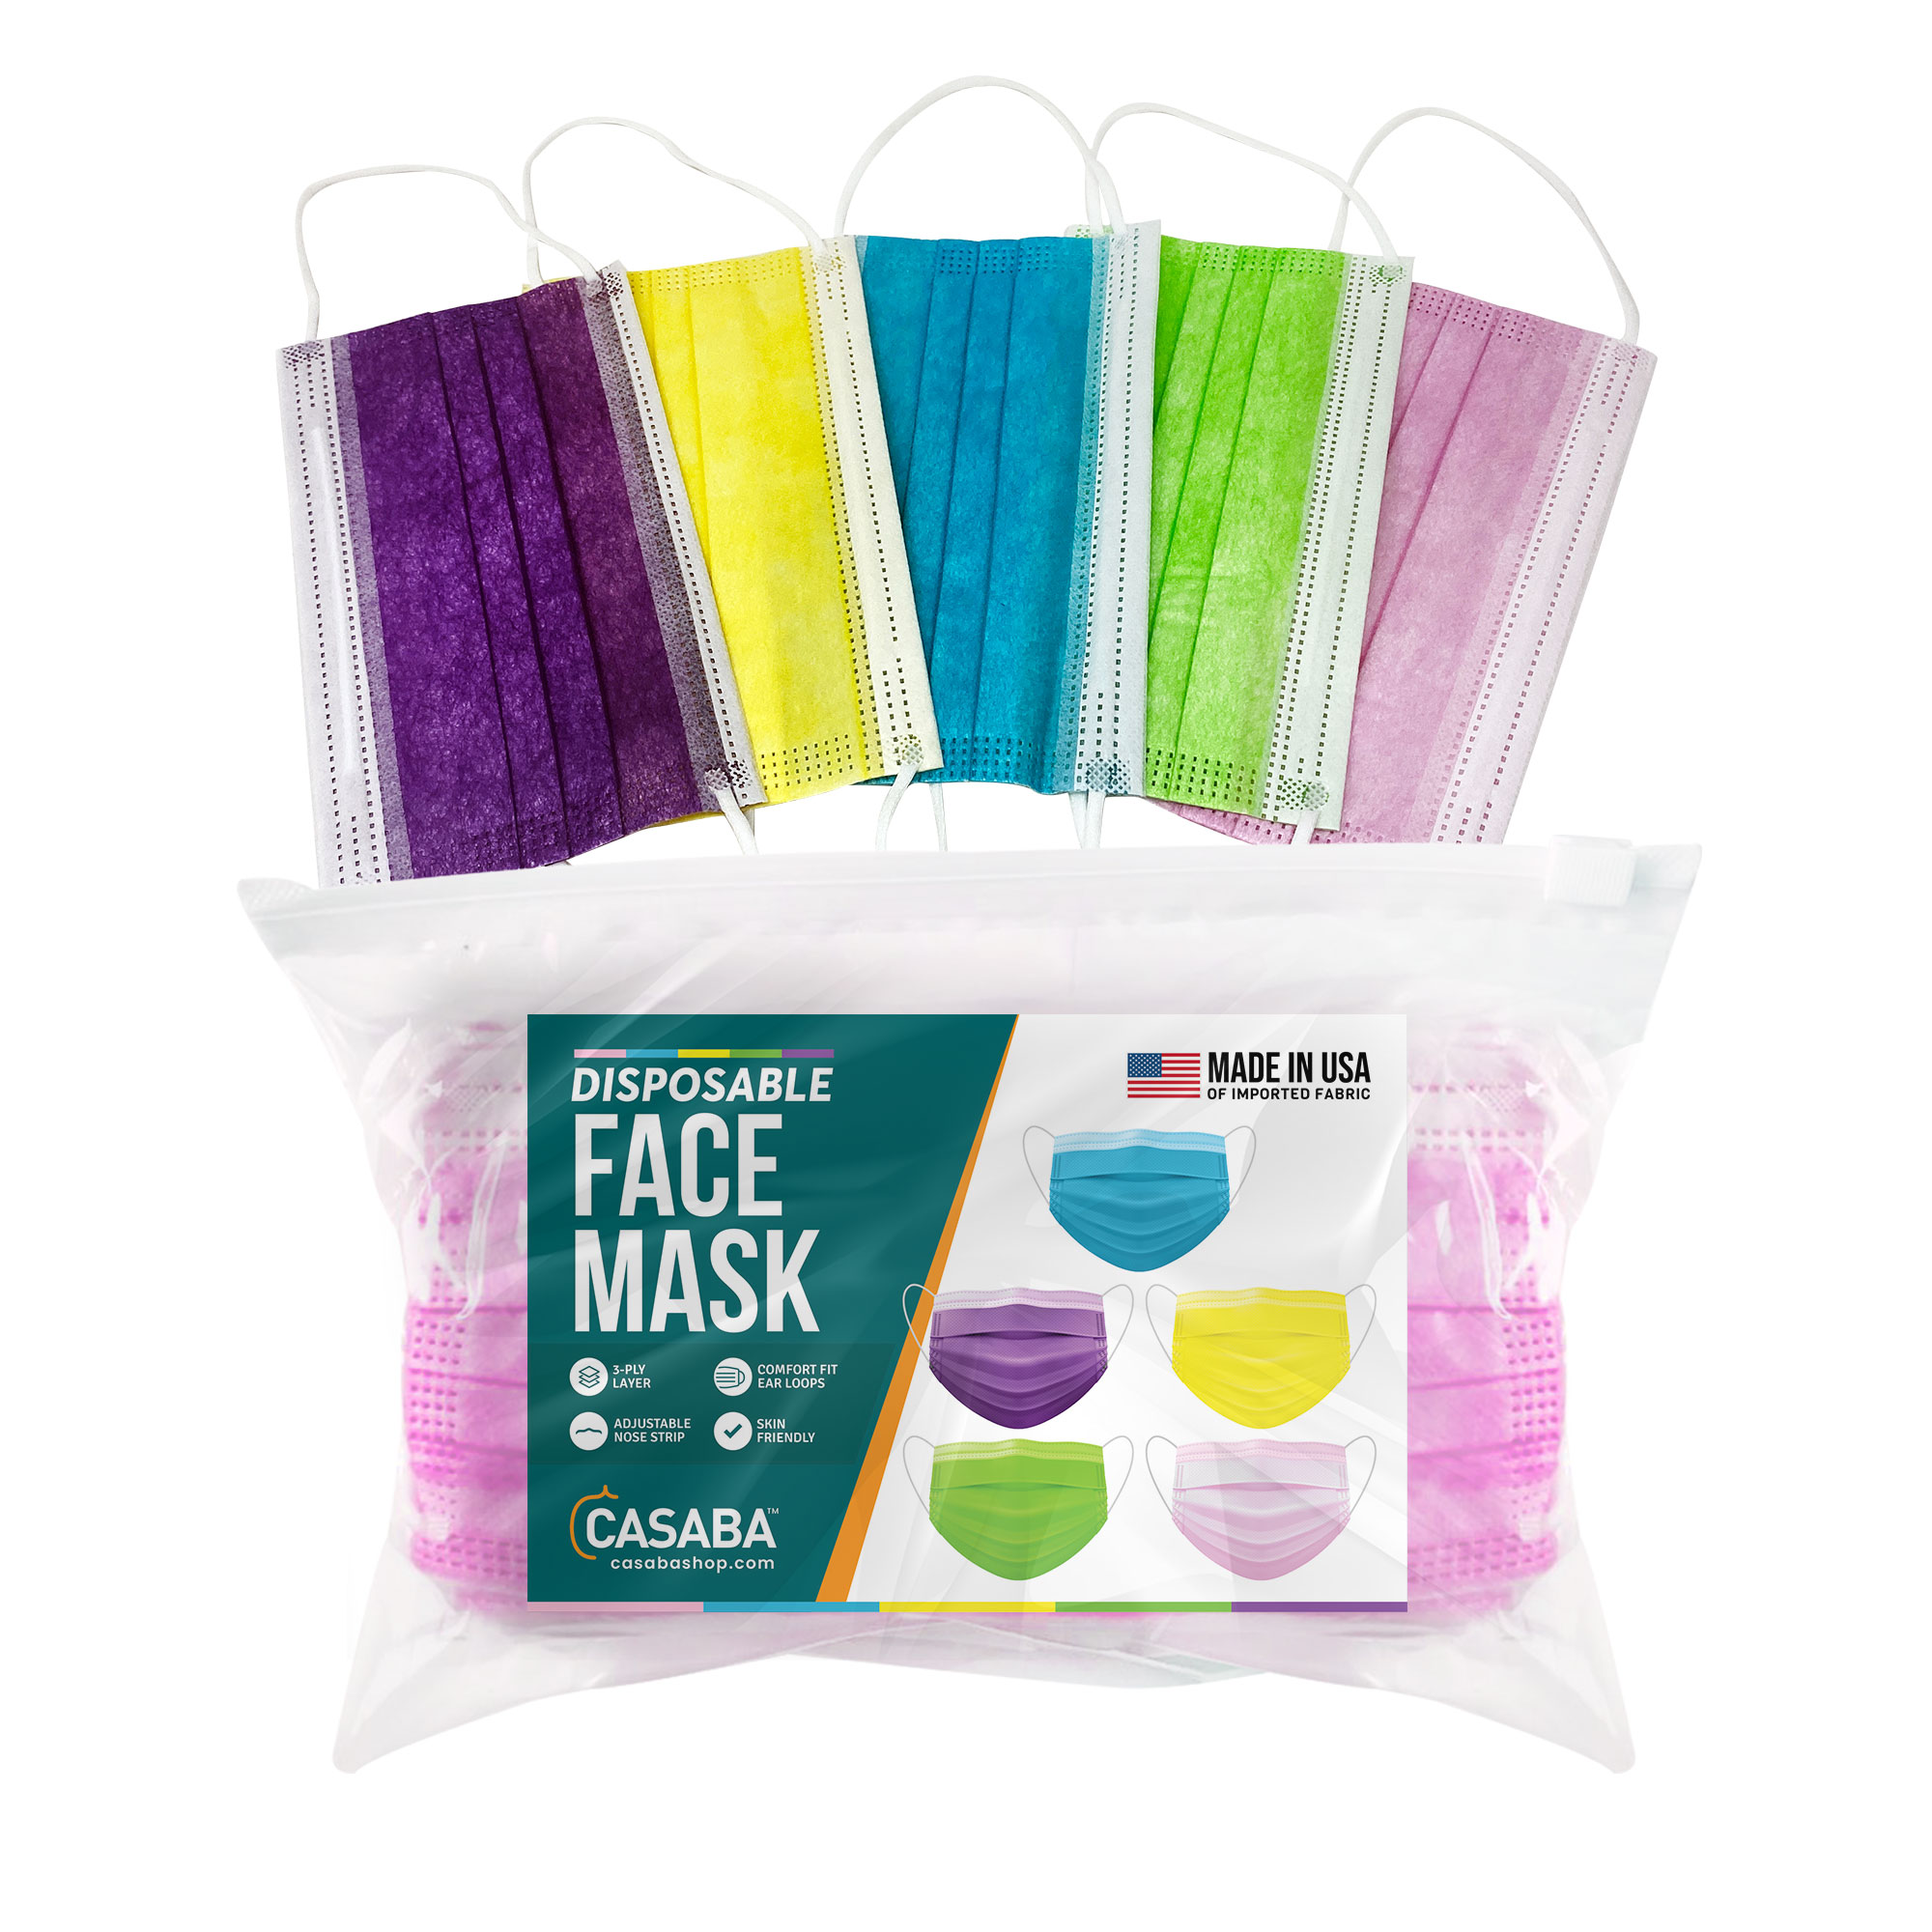 Casaba Shop introduces new Back to School Face Mask Packs 